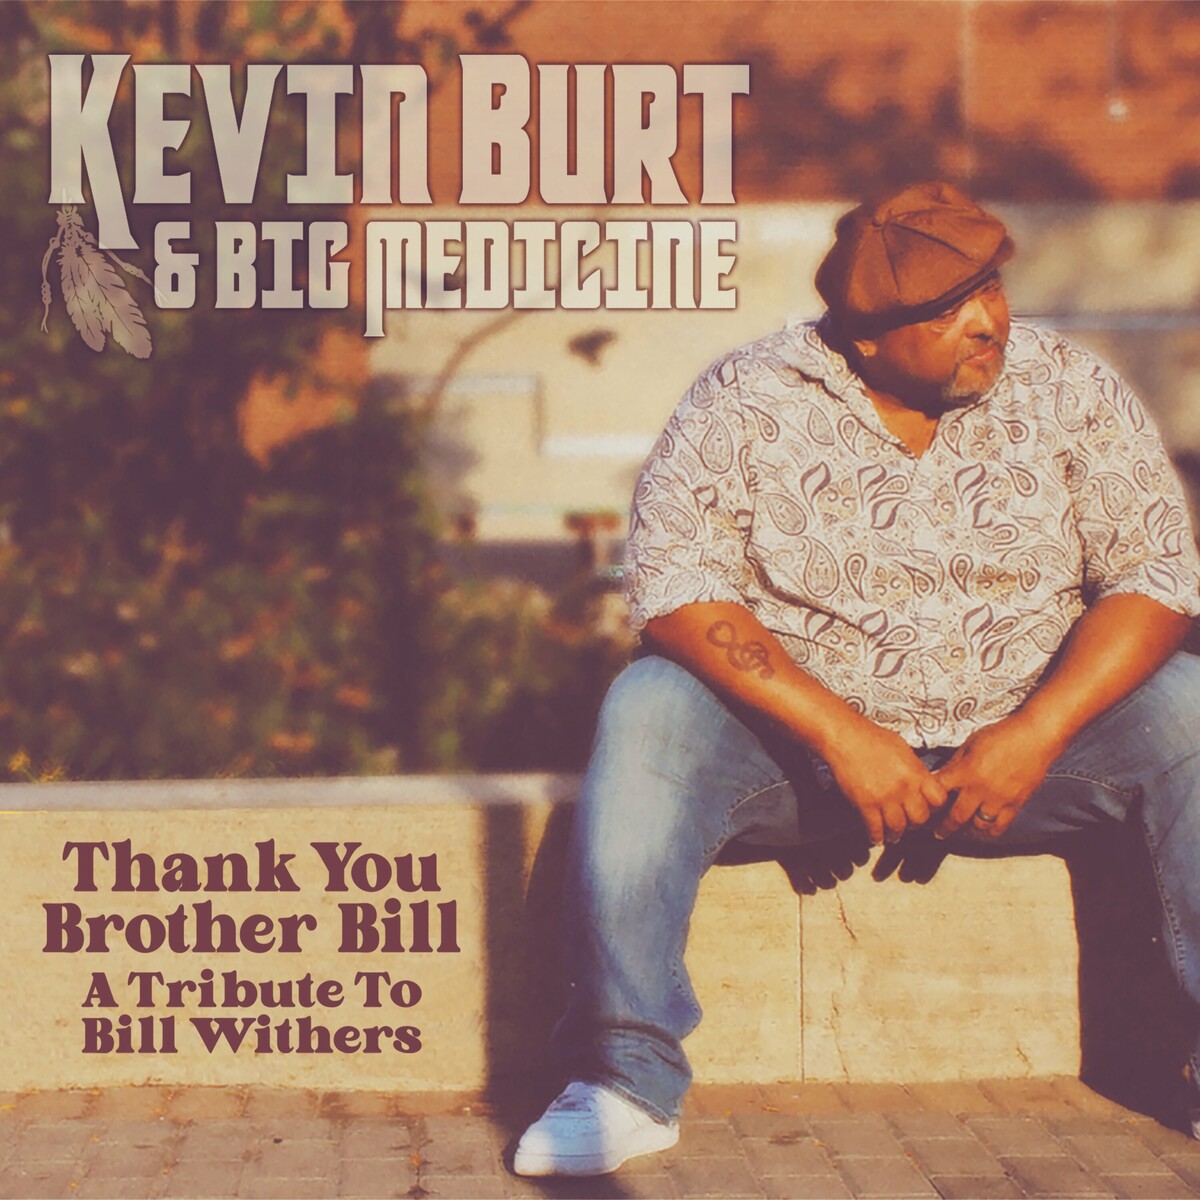 Kevin Burt & Big Medicine - Thank You Brother Bill A Tribute To Bill Whithers